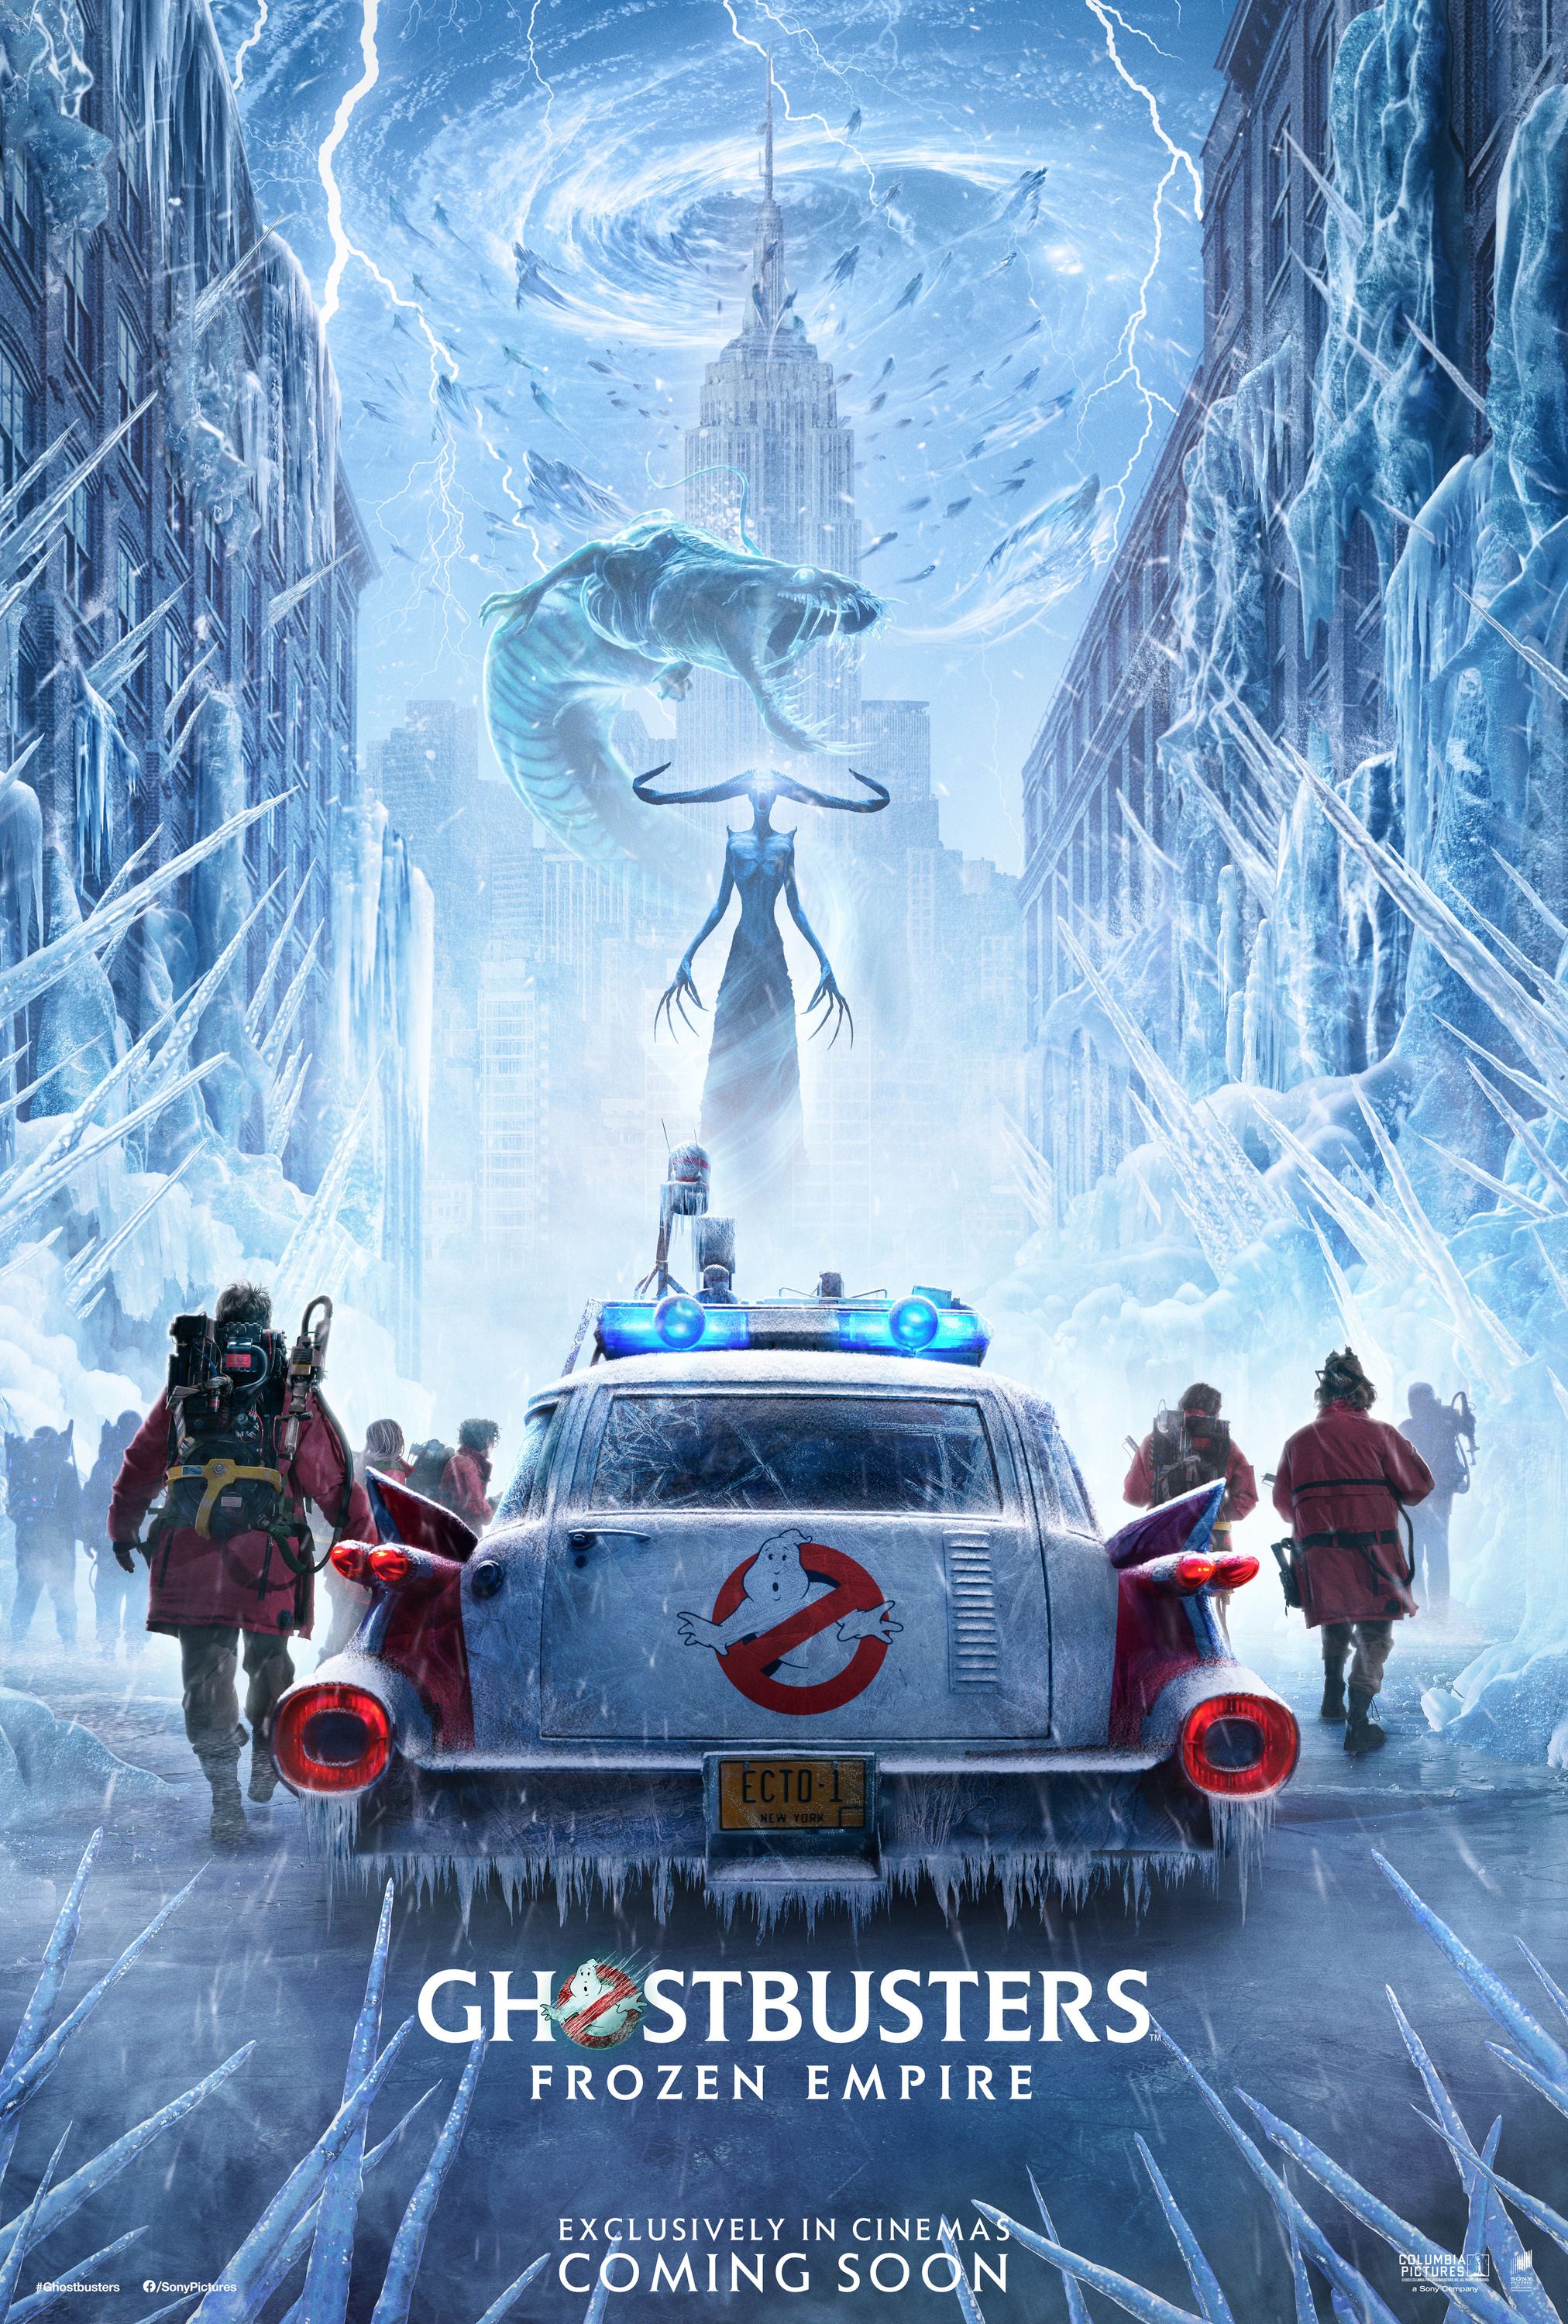 Ghostbusters Frozen Empire Trailer New York Is Absolutely Chilling